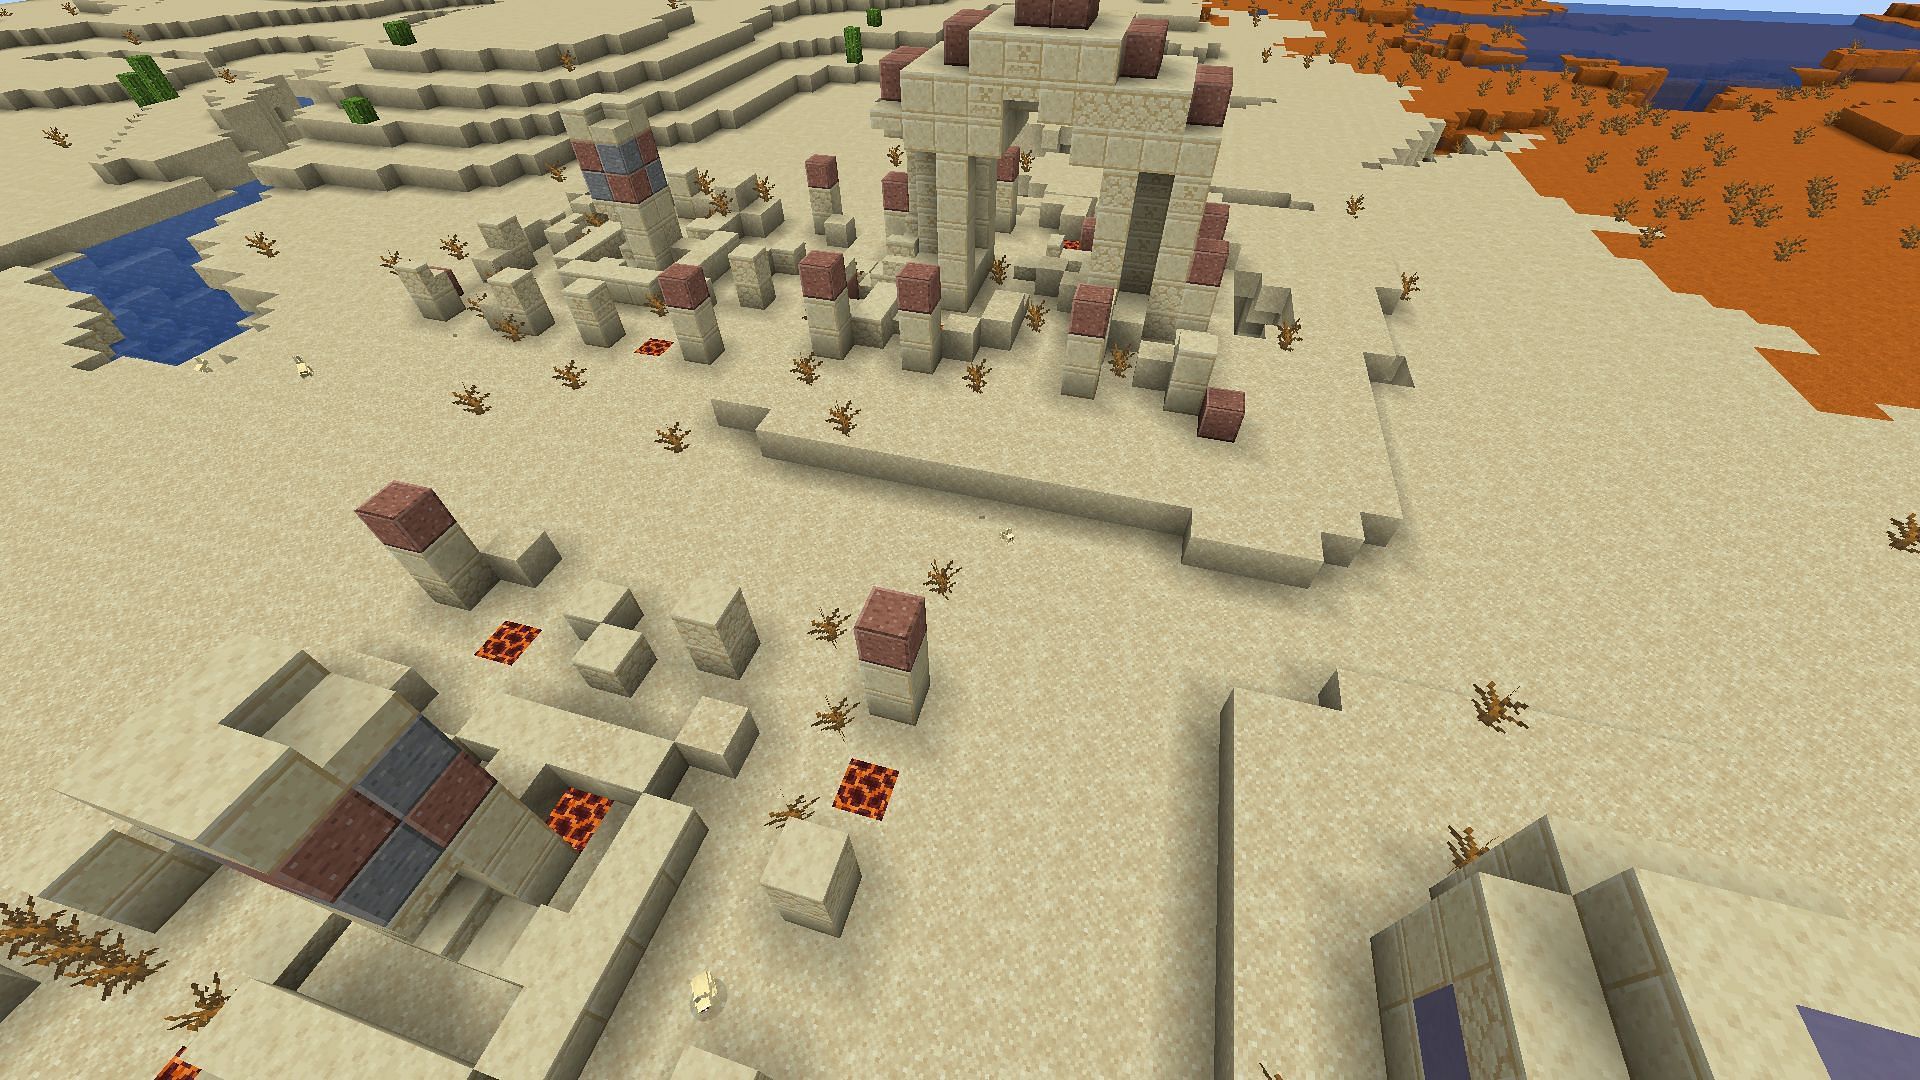 An example of a new structure: desert ruins (Image via Minecraft)